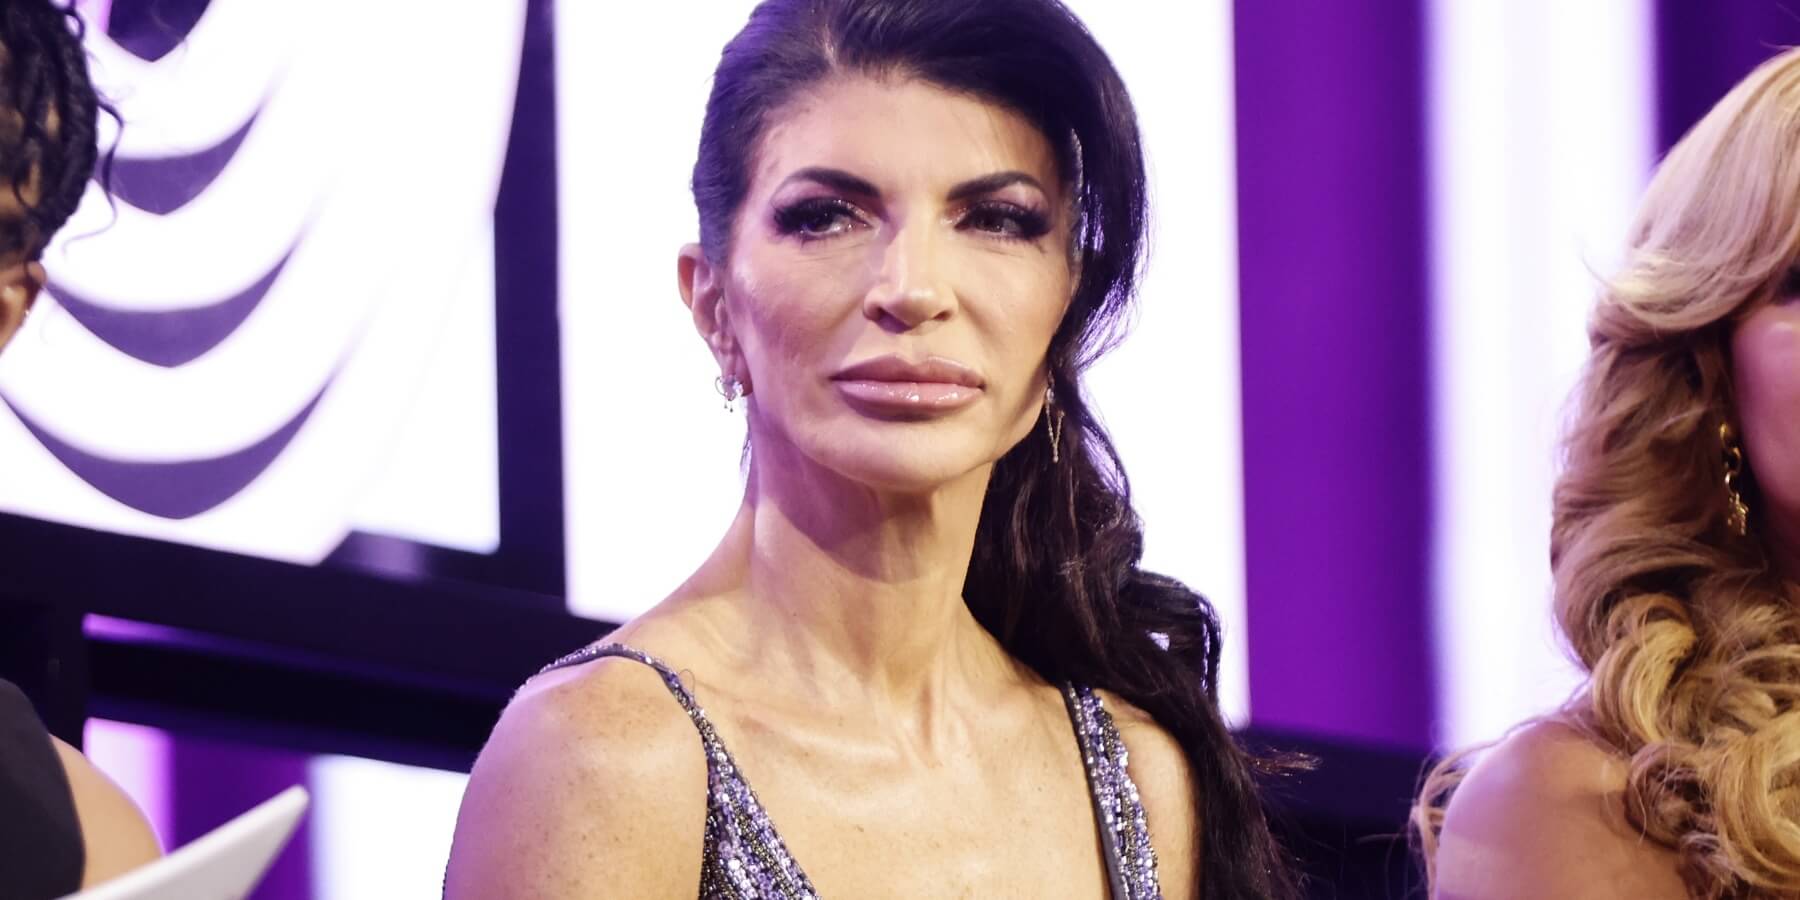 Teresa Giudice claims that her time in prison was a lot like being 'at college.'